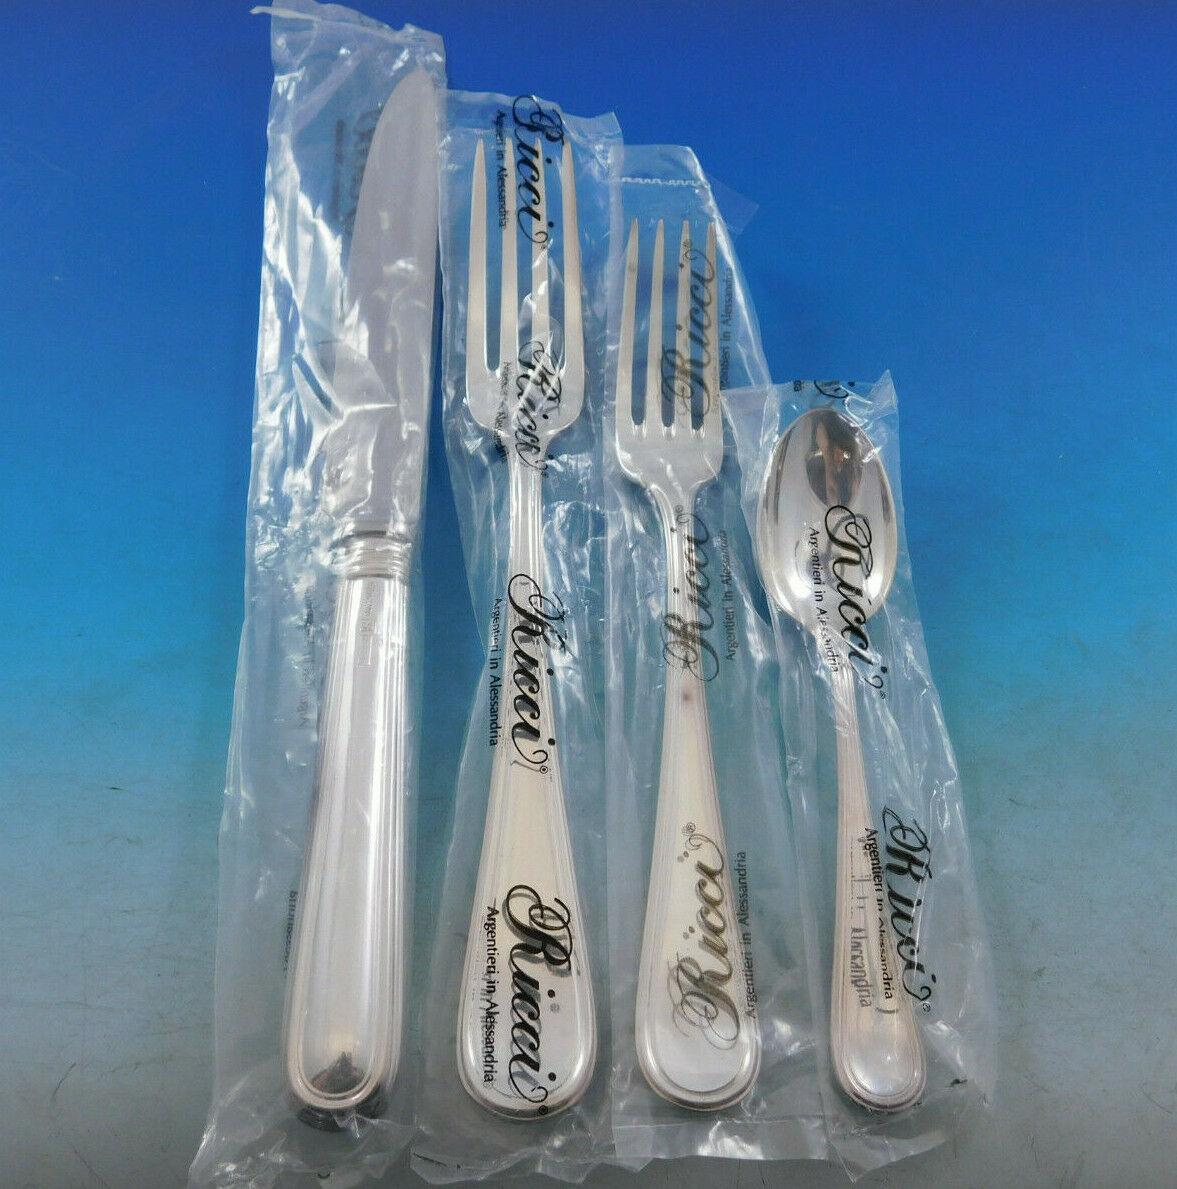 Gorgeous unused Ascot by Ricci 800 silver flatware dinner set - 76 pieces. This pattern is Continental size and heavy. This set includes:

12 Dinner knives, pointed, 9 3/4